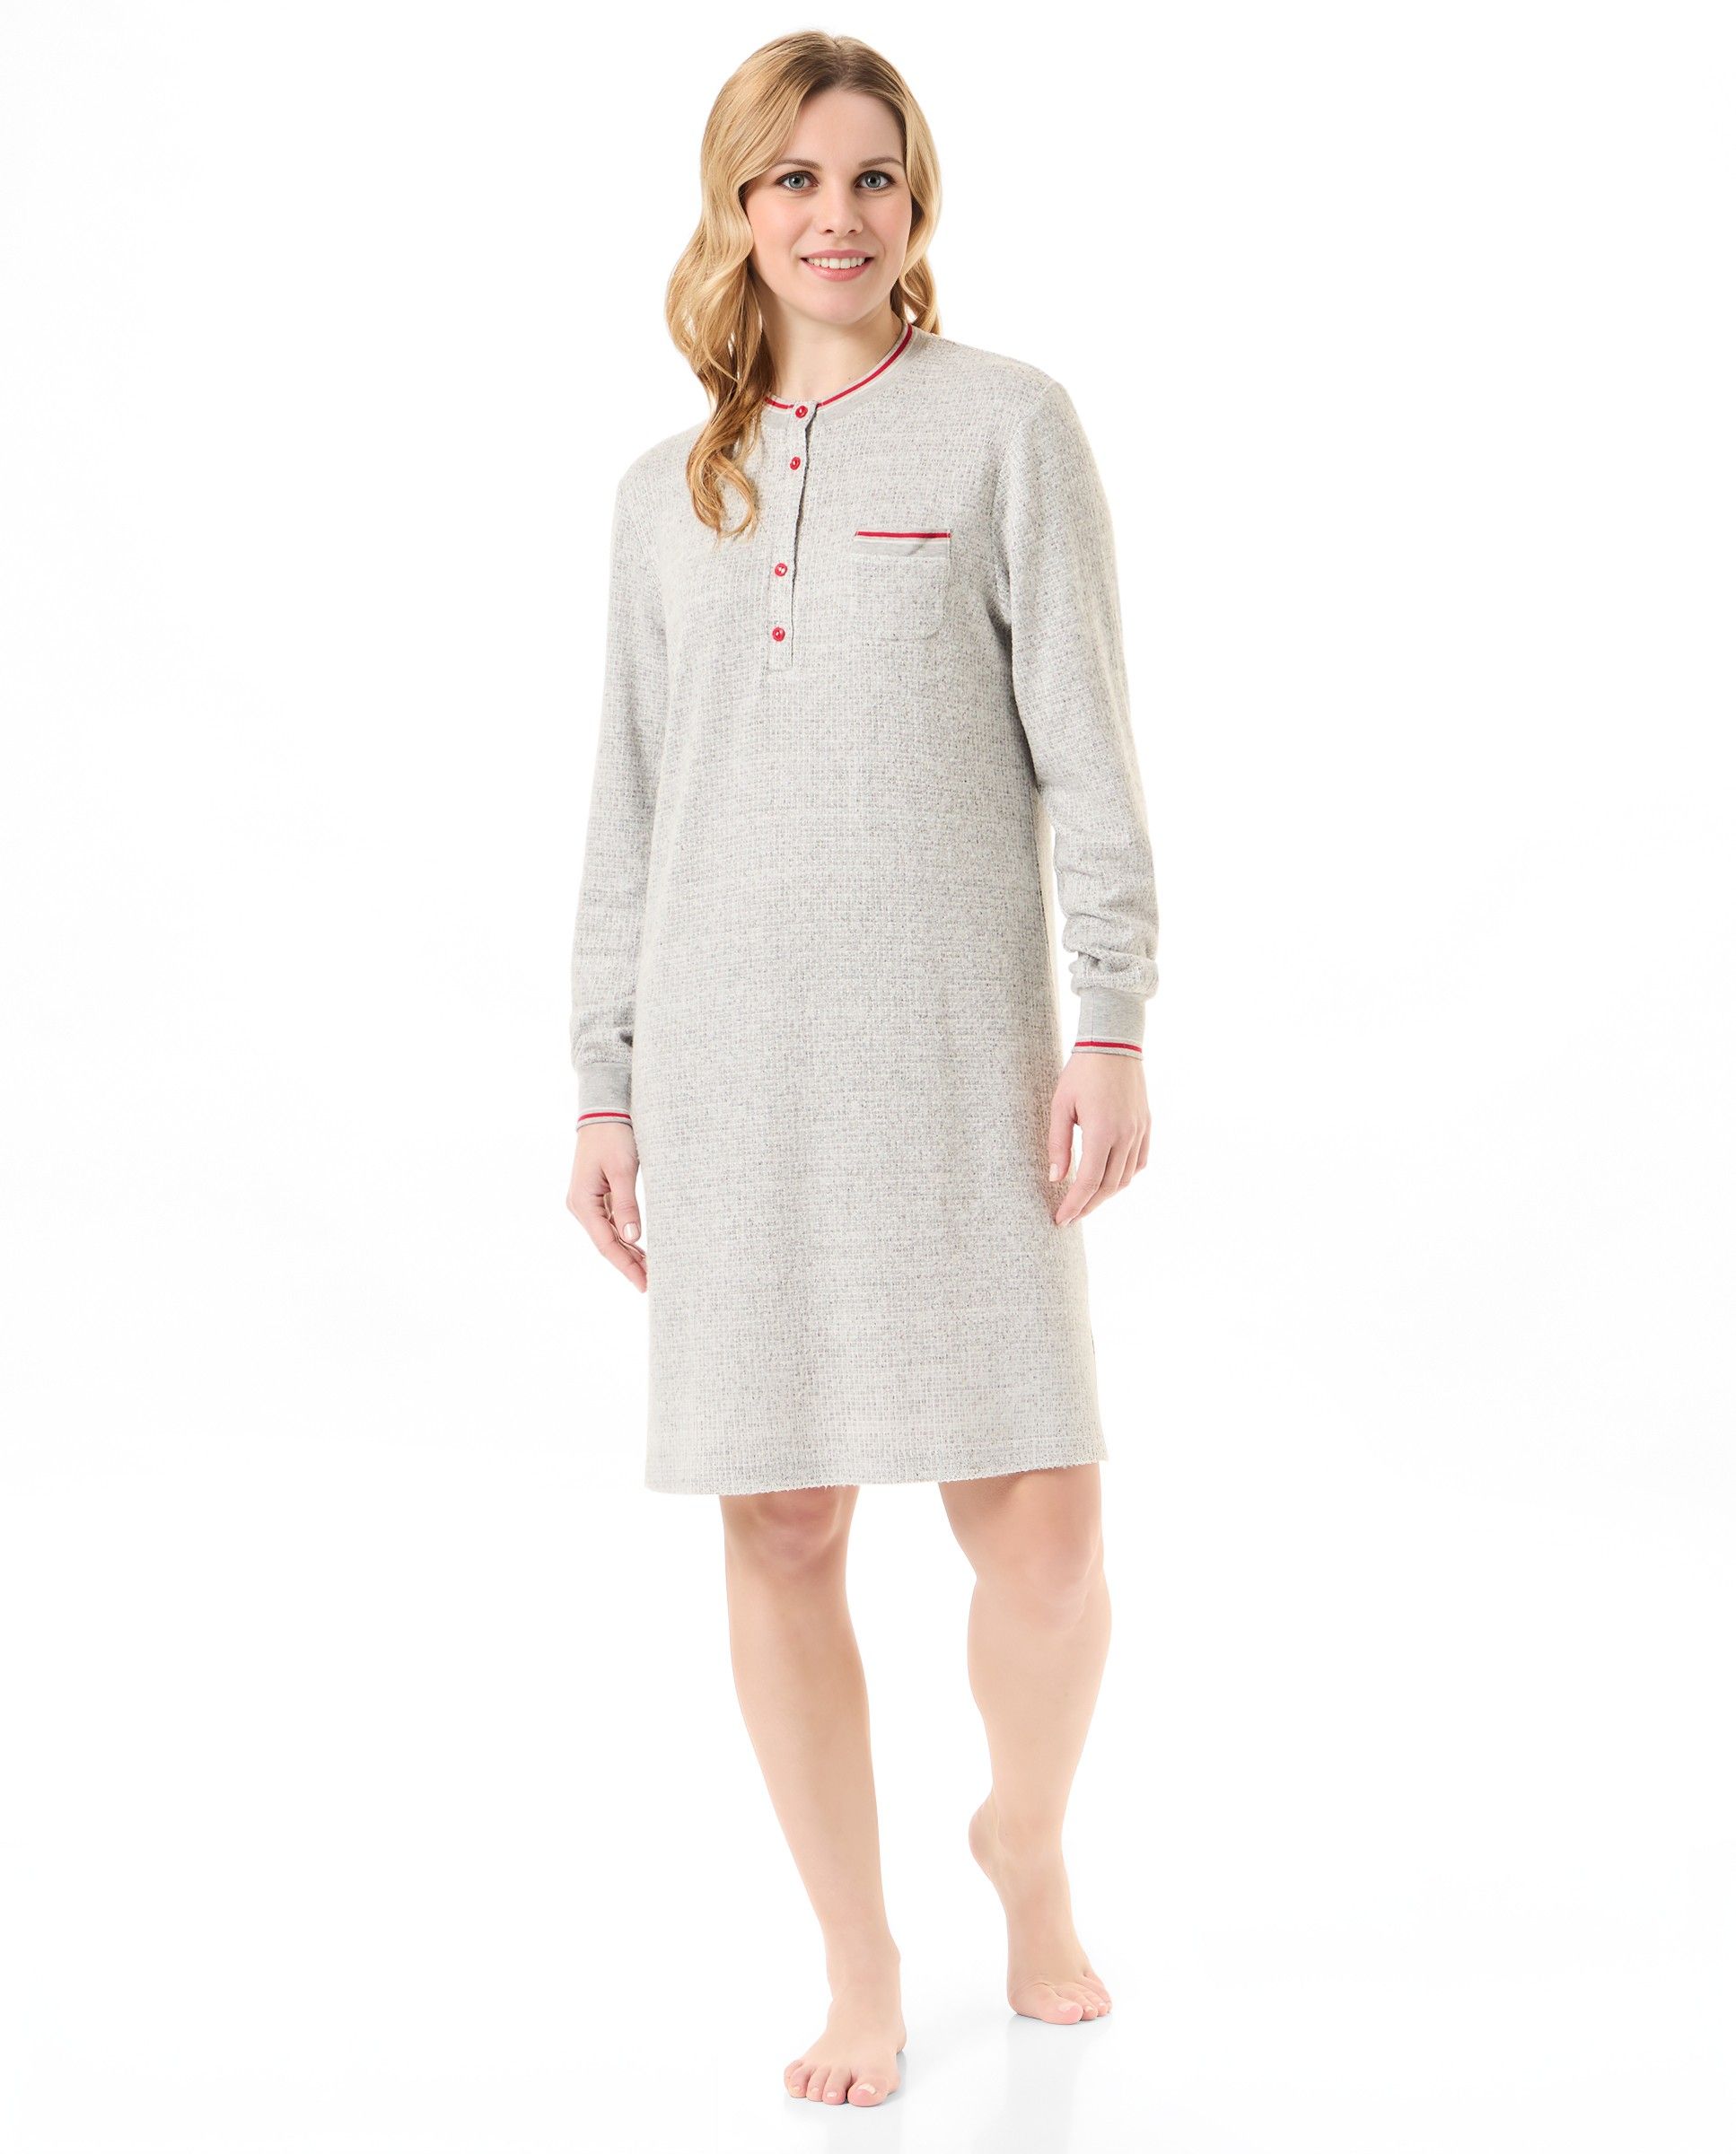 Woman in plain nightdress, round neck with buttons, long sleeves with cuffs.